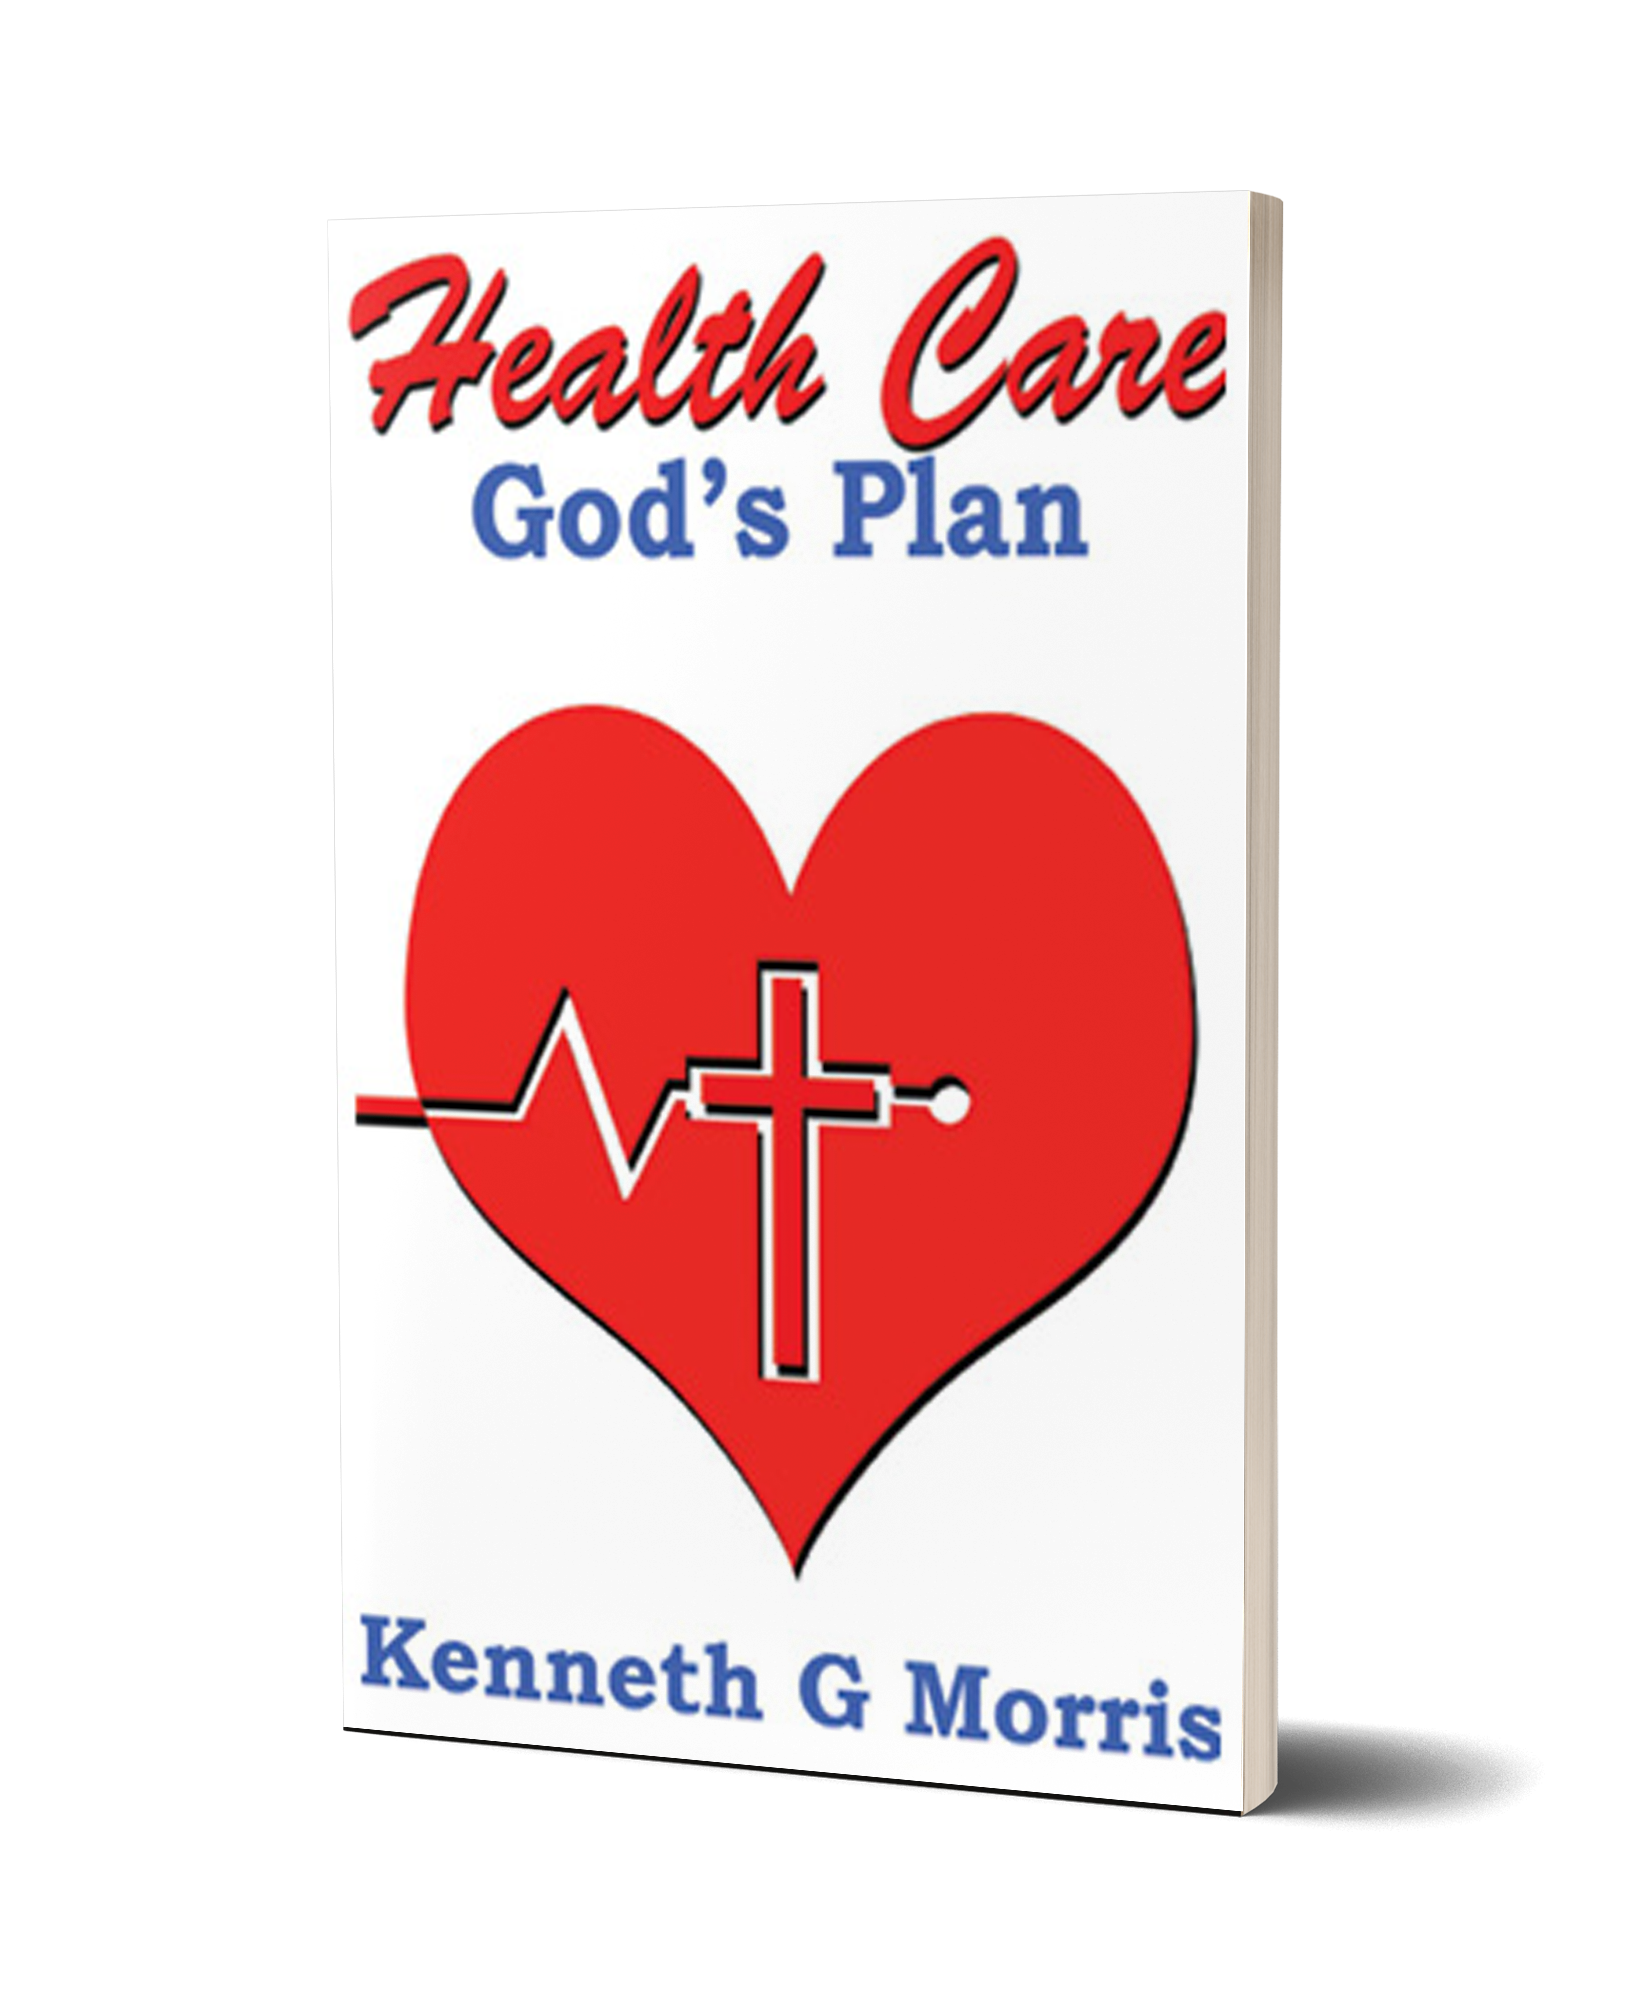 Health Care; God's Plan by Kenneth G. Morris